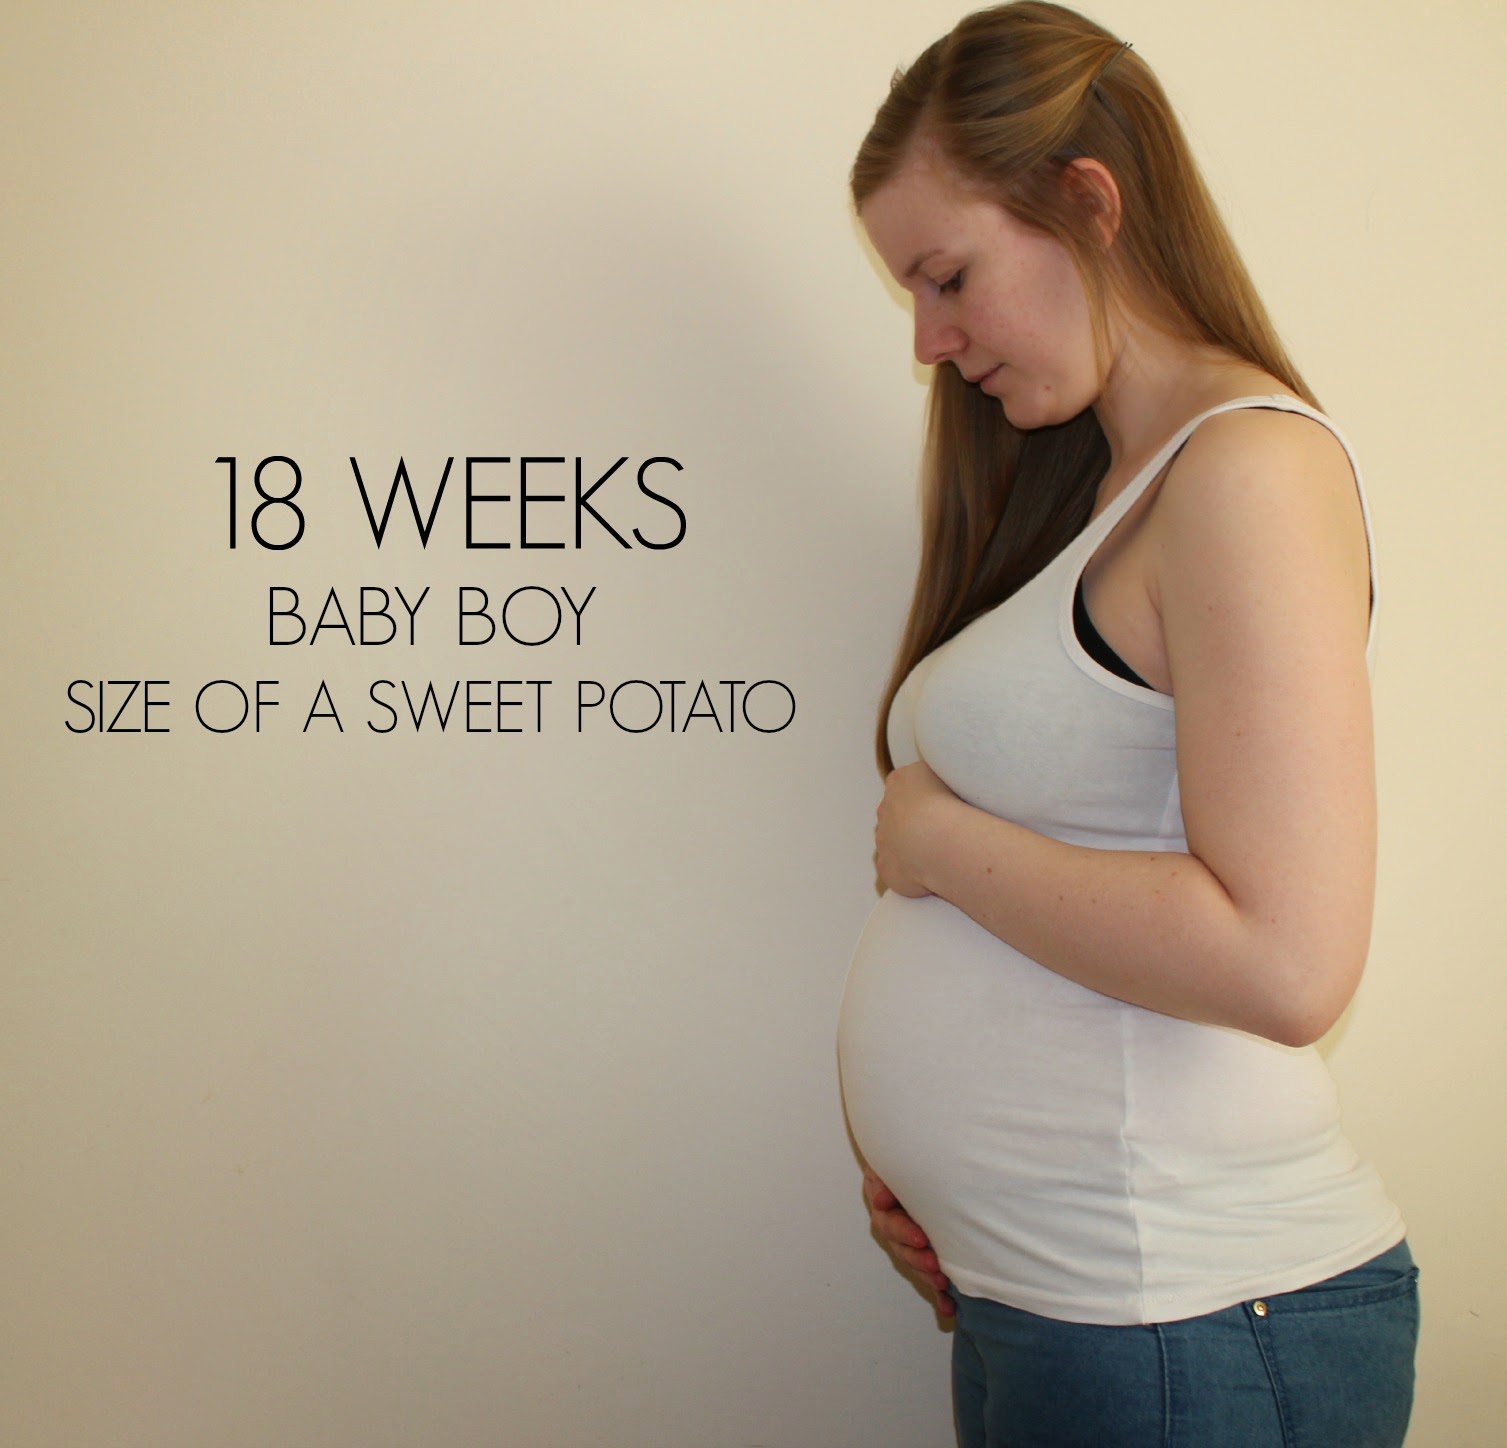 18 Weeks Born Baby Development: What to Expect